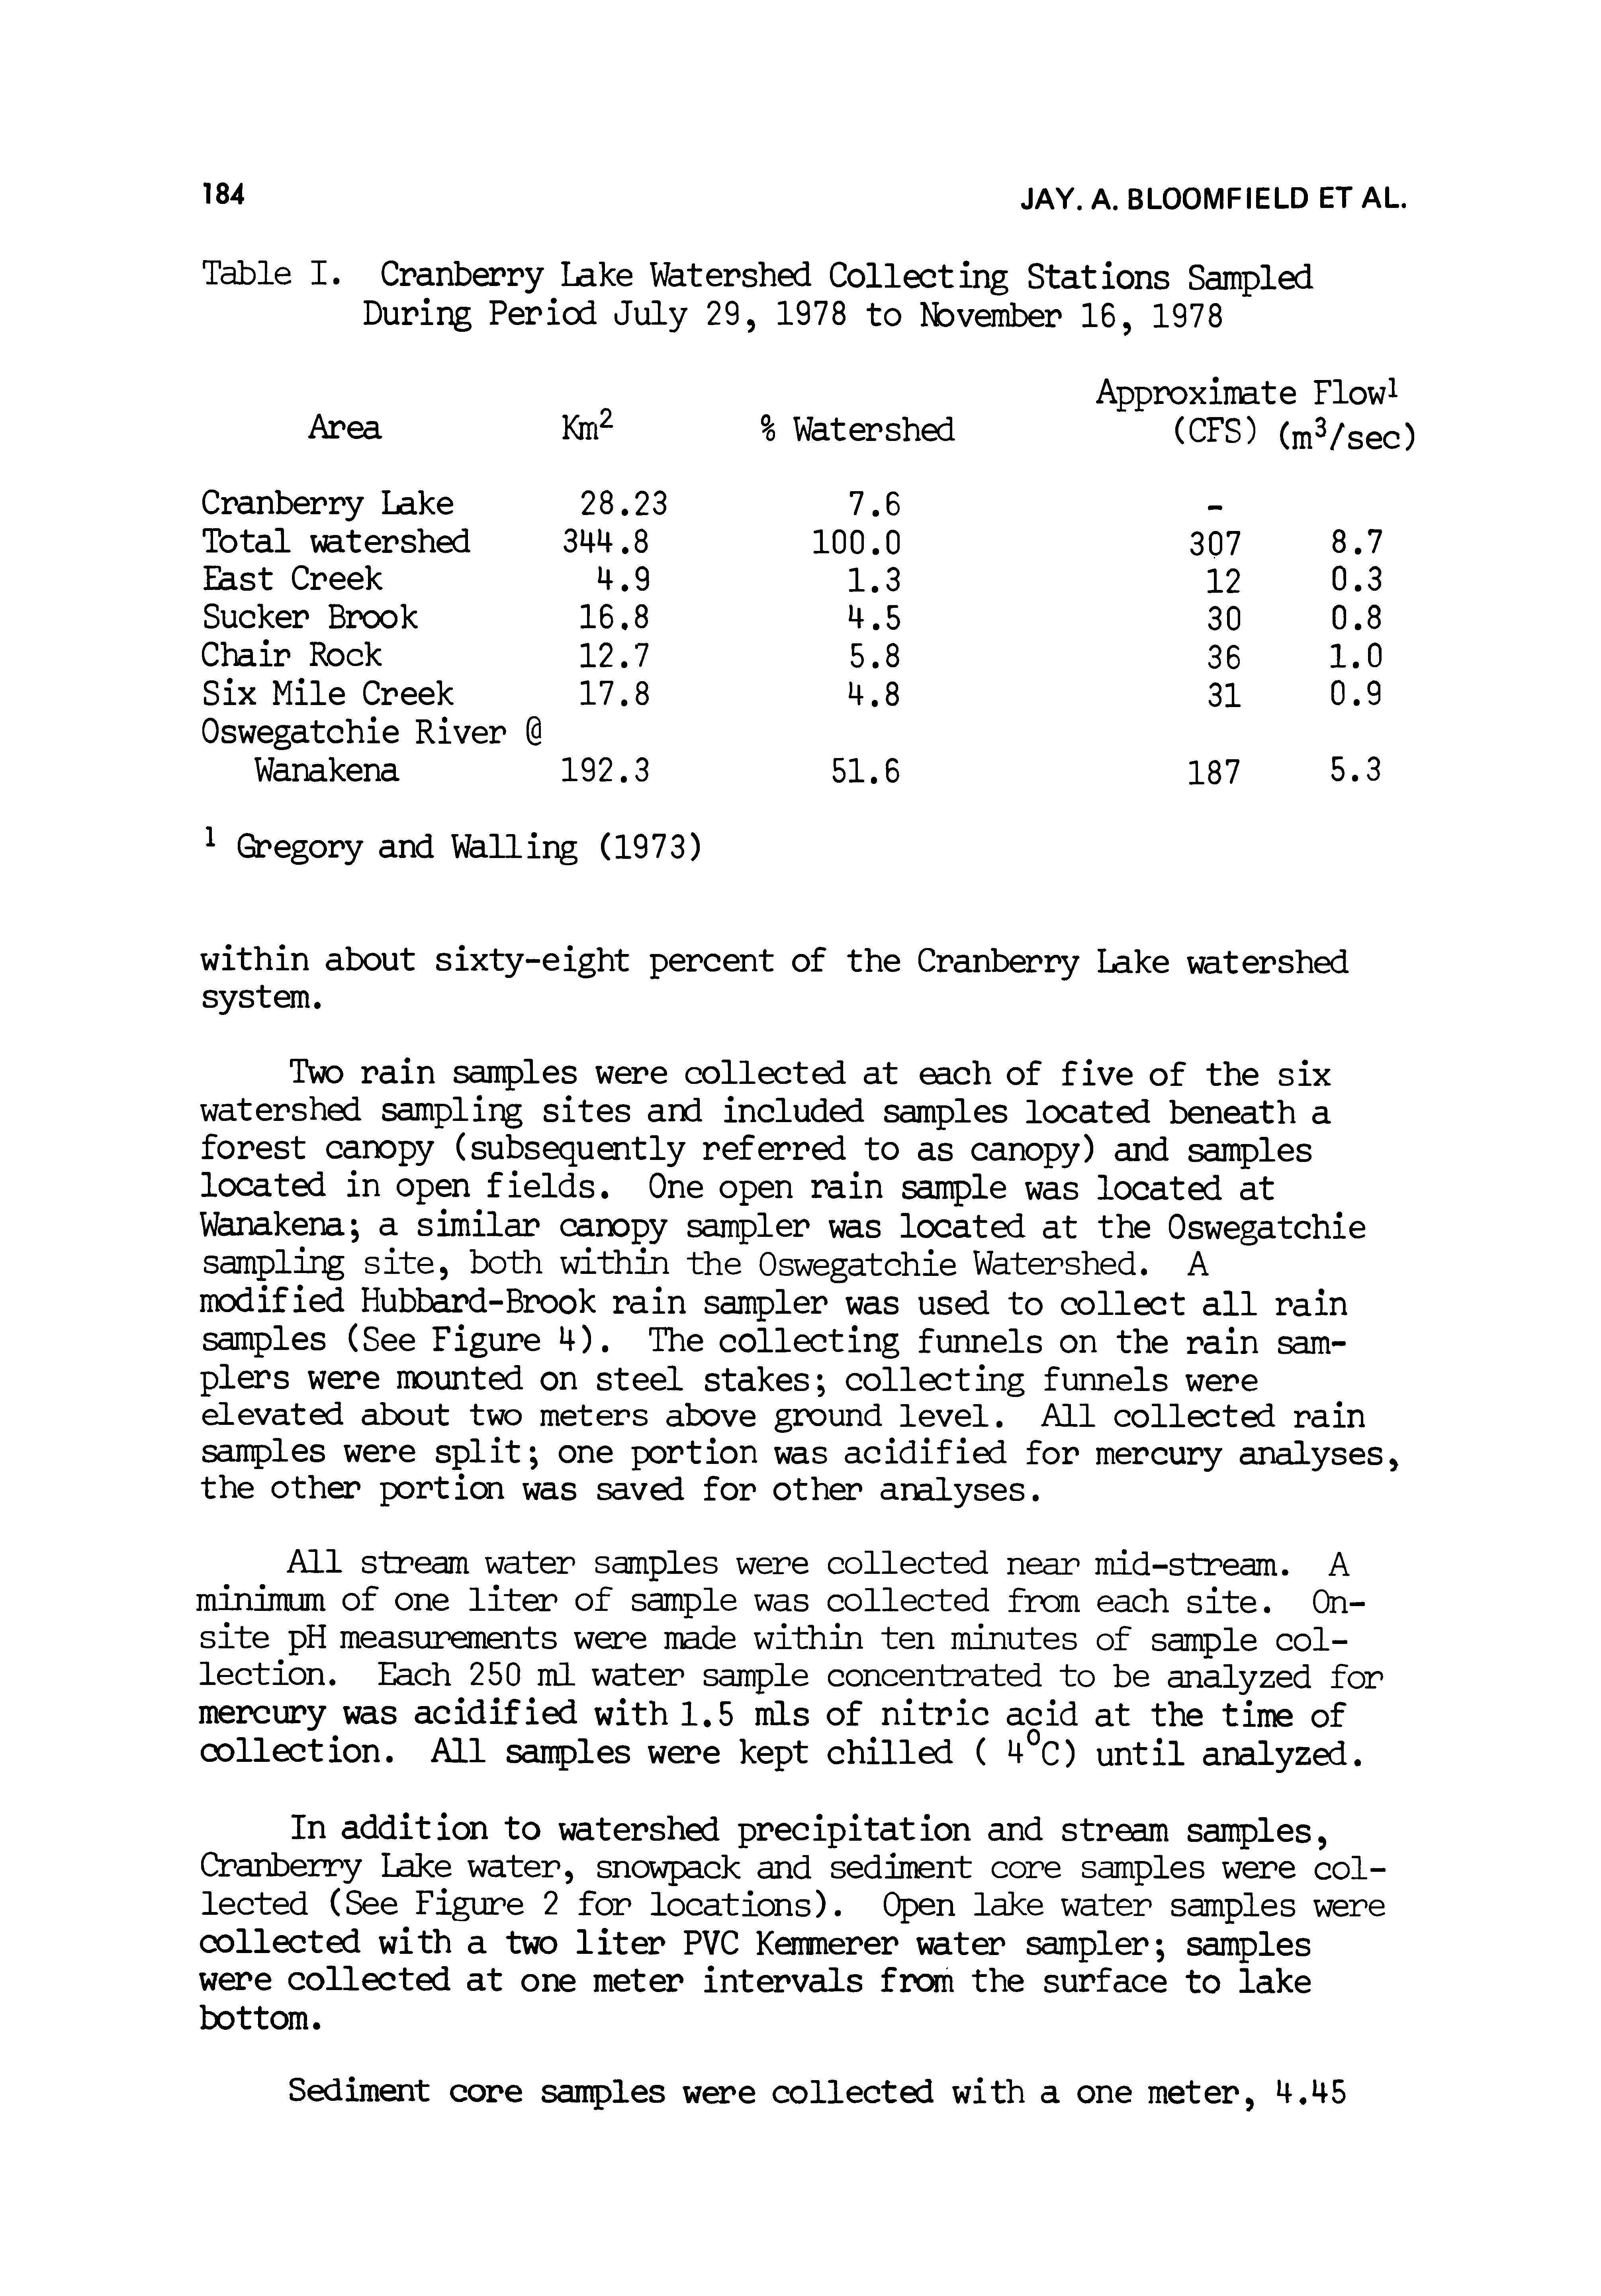 Table I. Cranberry Lake Watershed Collecting Stations Sanpled During Period July 29, 1978 to NDvember 16, 1978...